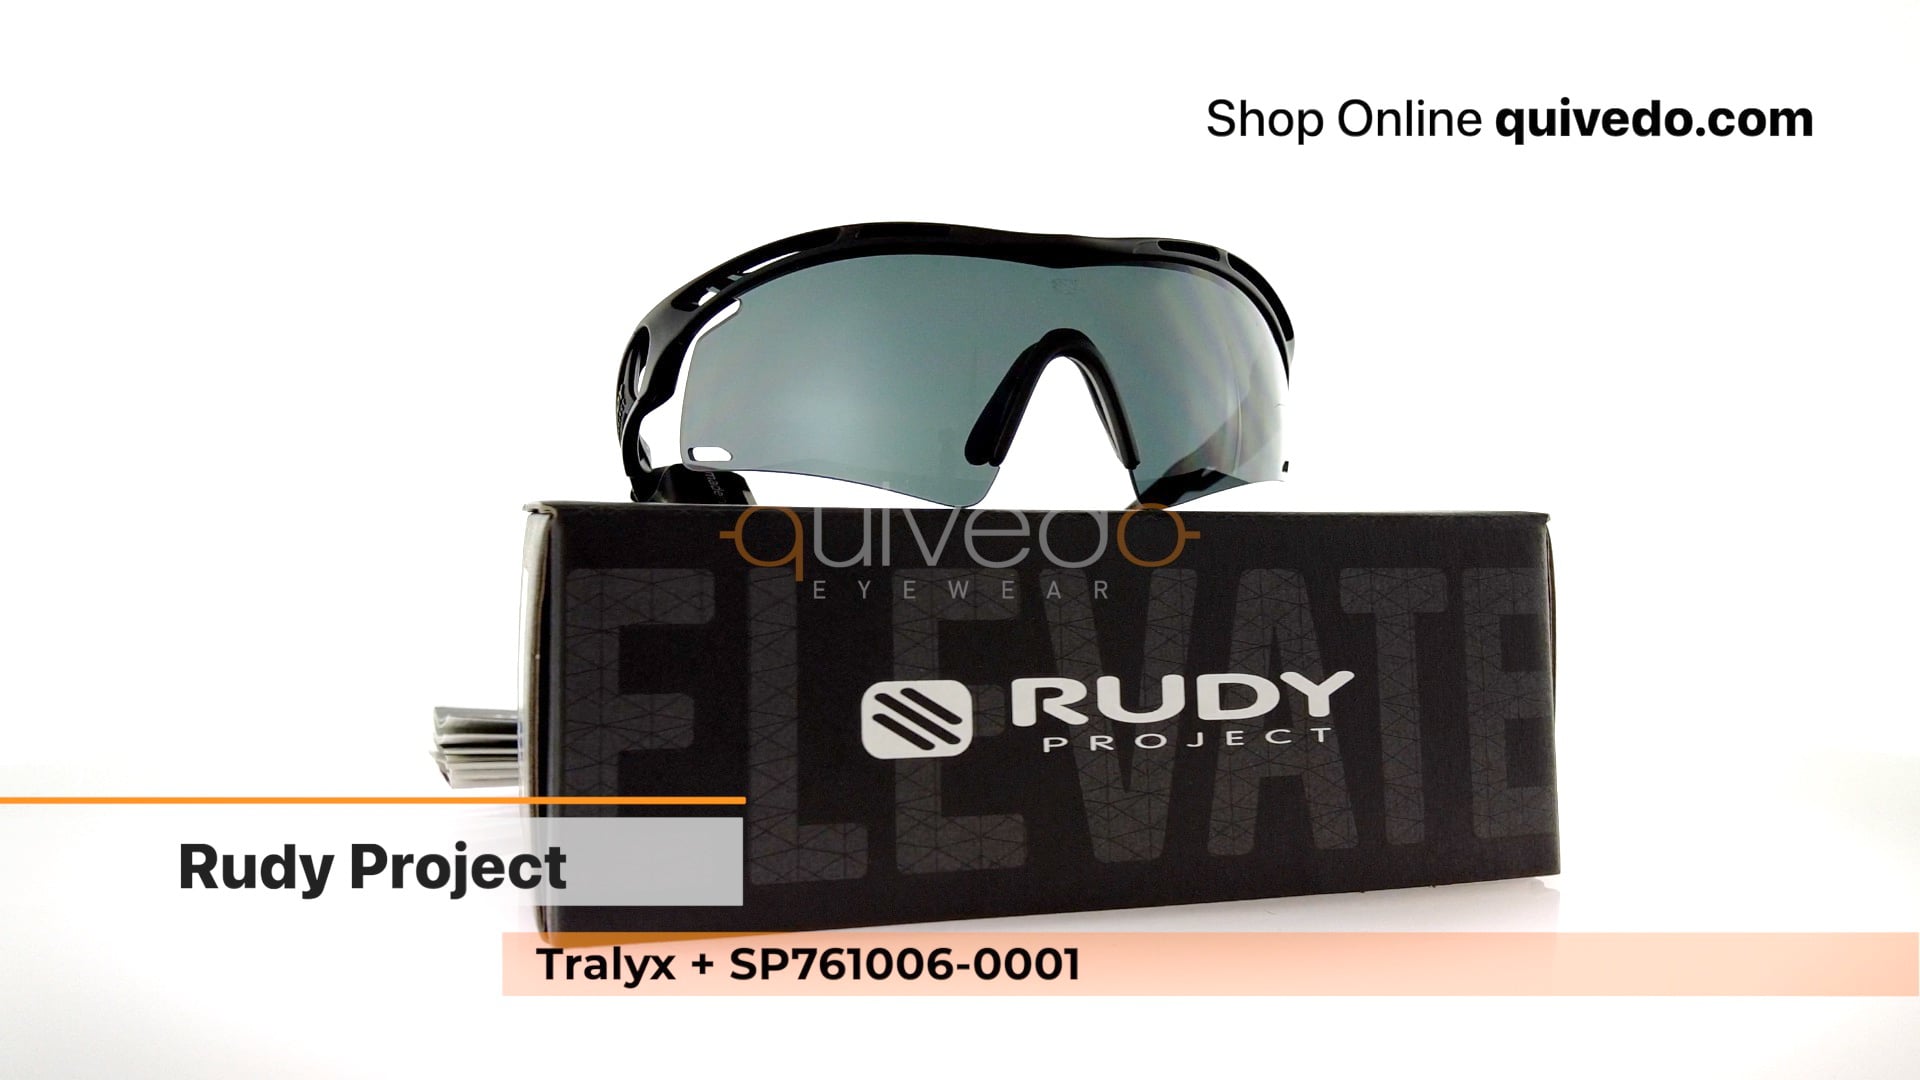 Rudy Project Tralyx + SP761006-0001